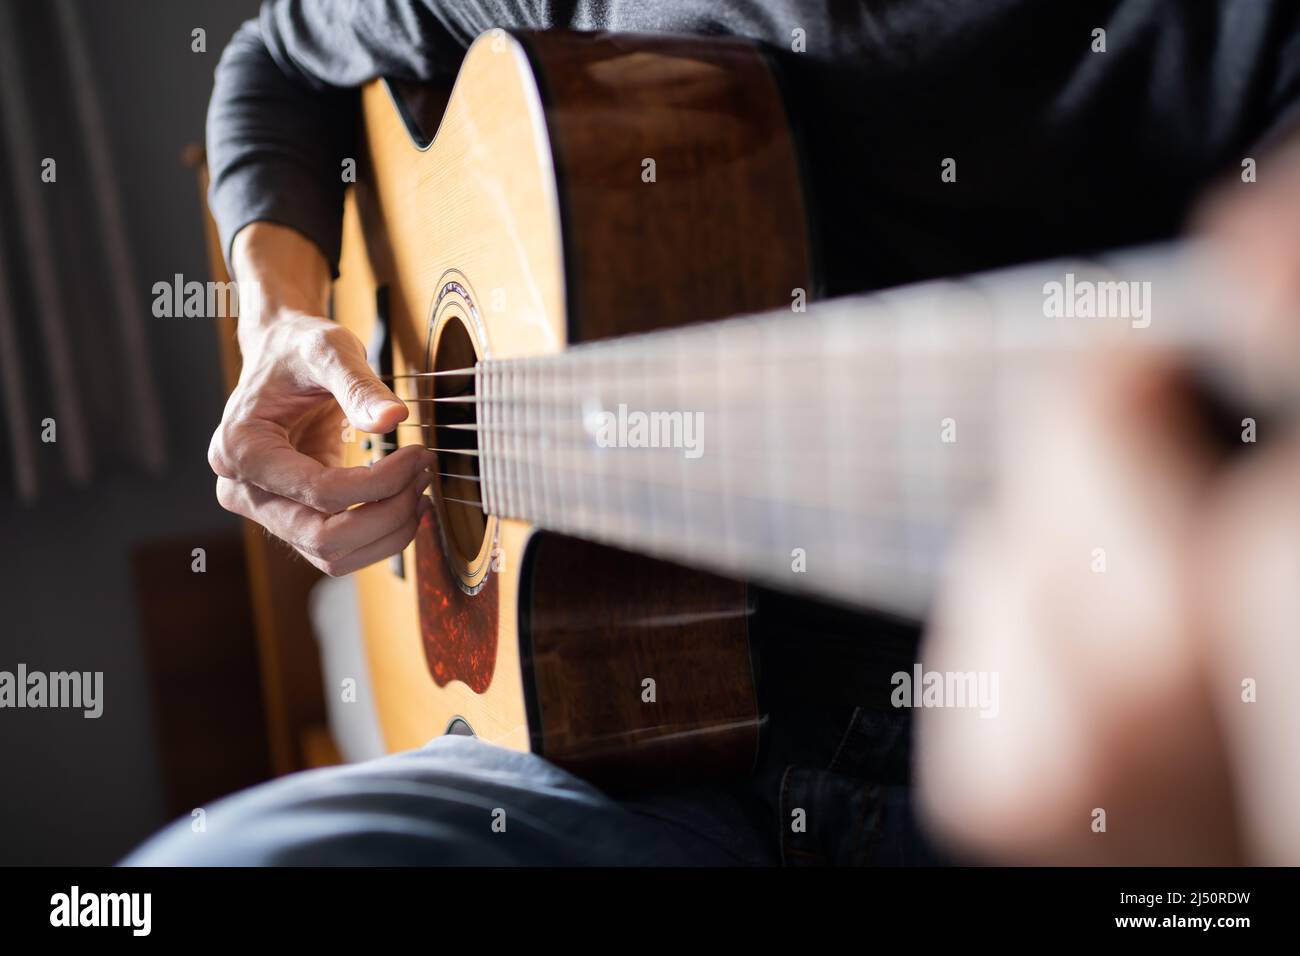 Acoustic guitar played by a man Stock Photo